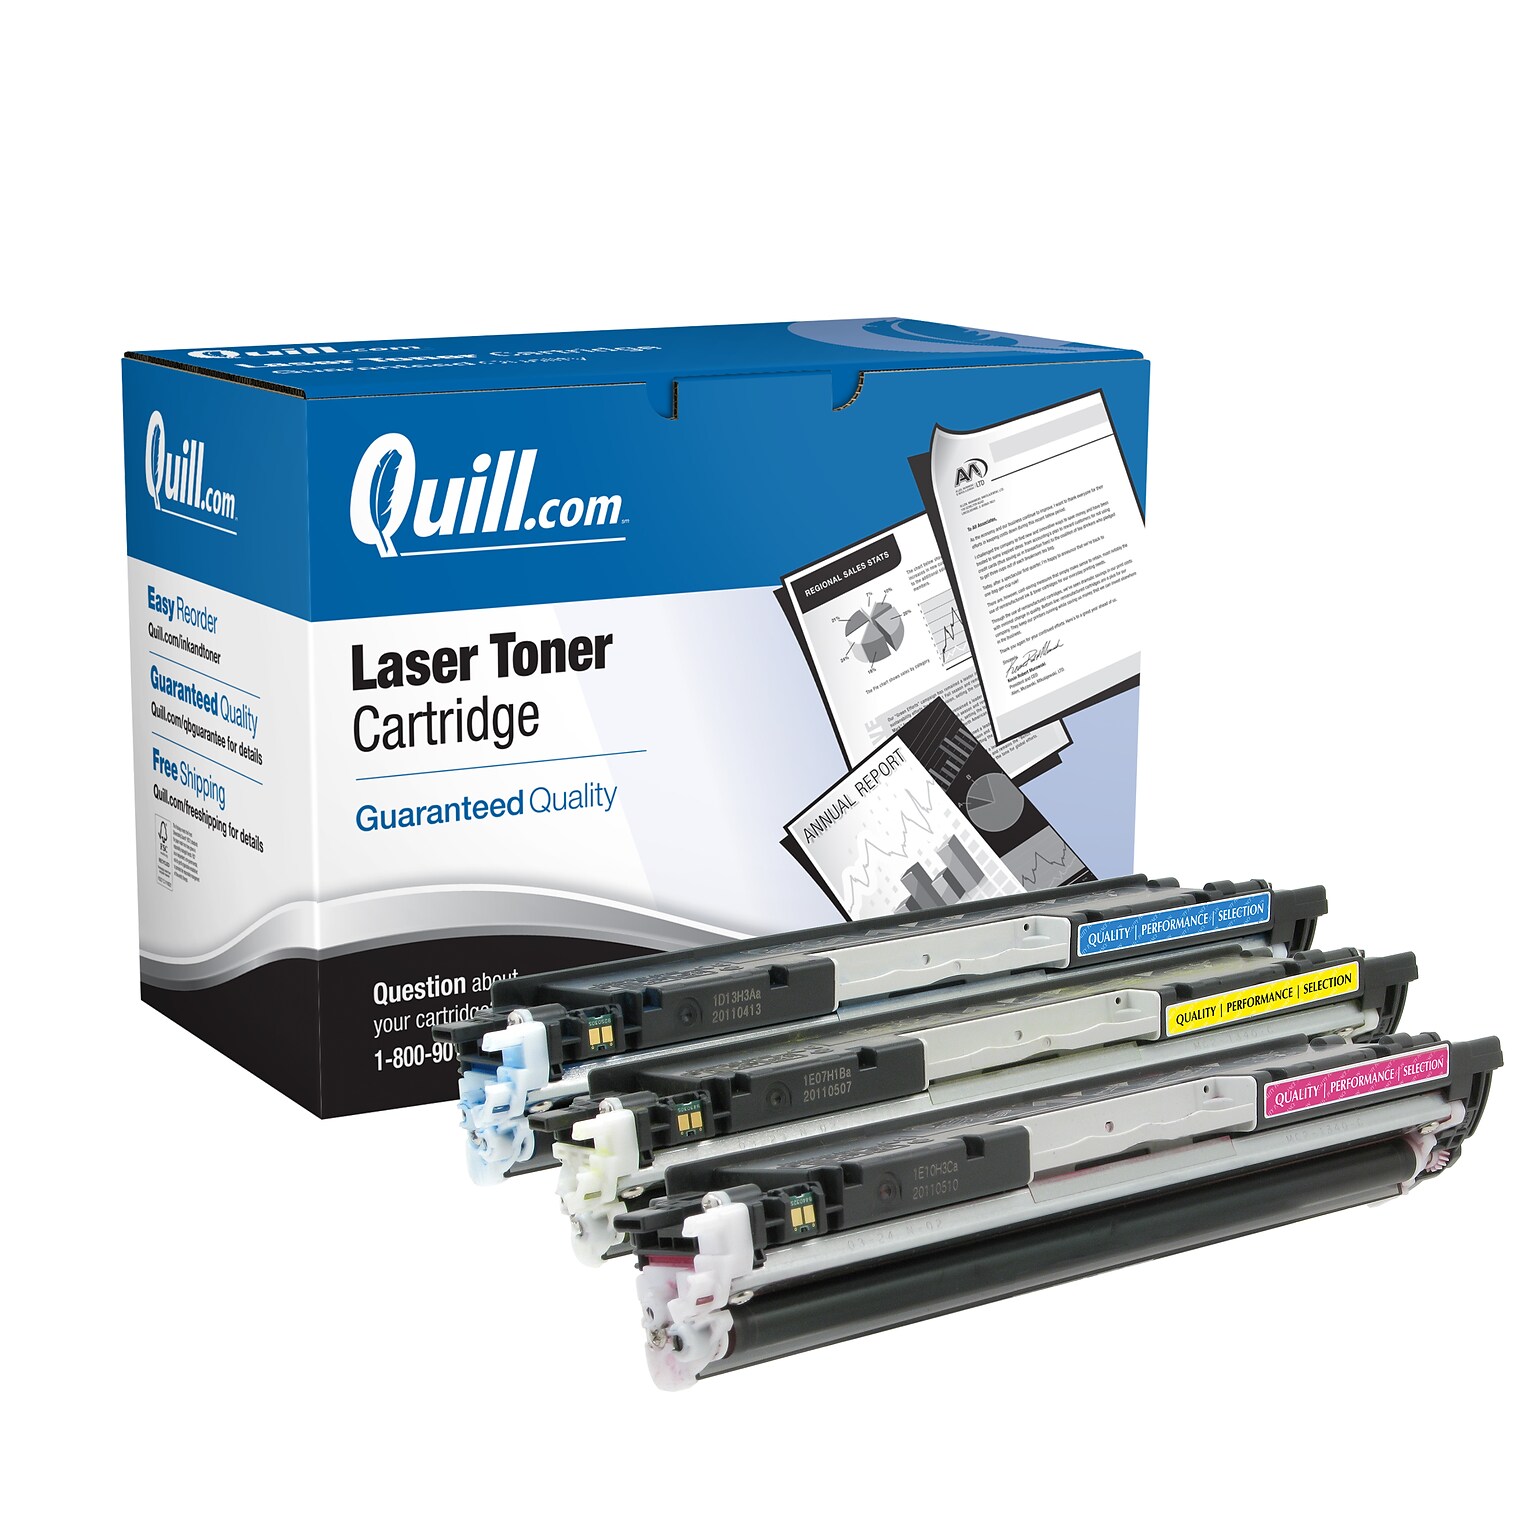 Quill Brand® Remanufactured Cyan/Magenta/Yellow Standard Yield Toner Cartridge Replacement for HP 126A (CF341A), 3/Pack